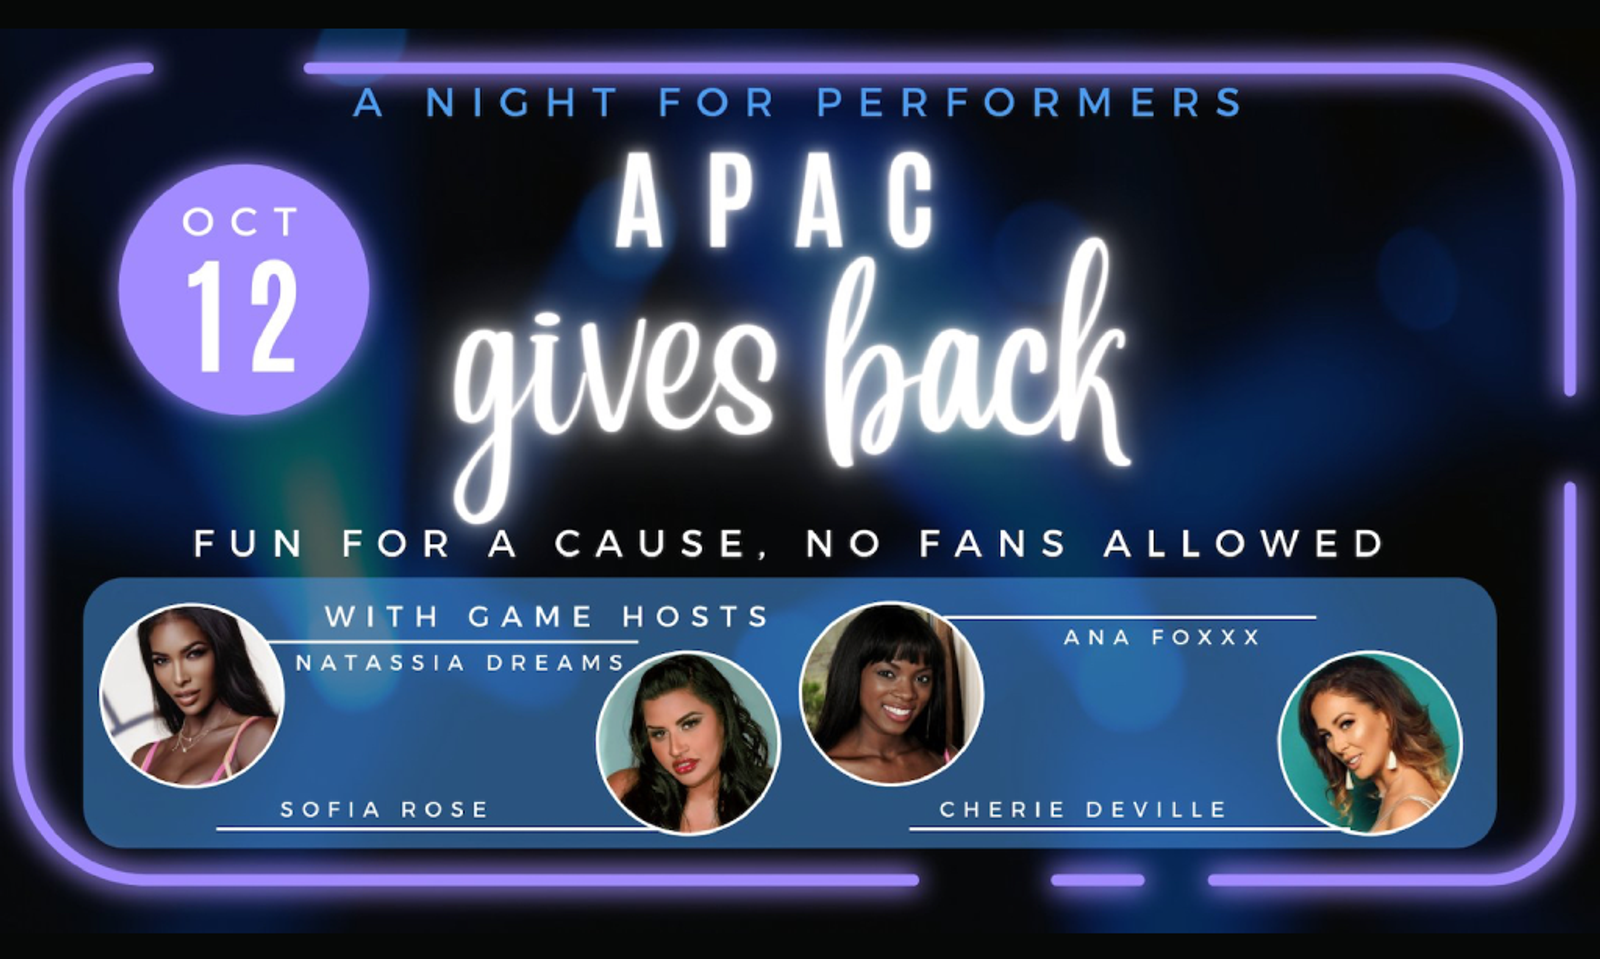 Date Announced for APAC Gives Back: A Night for Performers